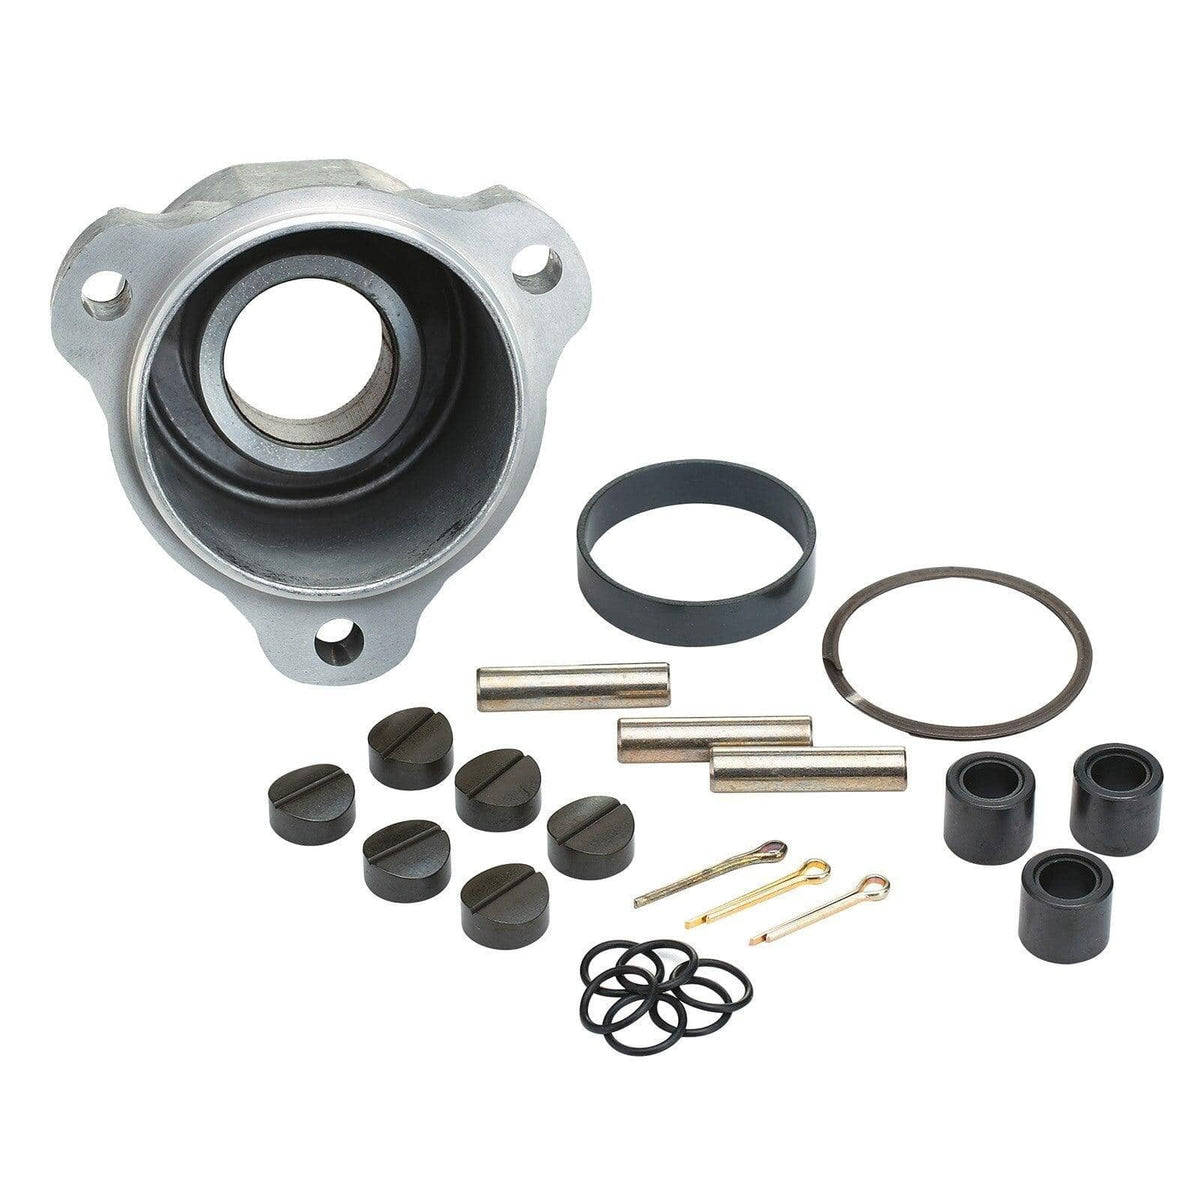 Maintenance Kit for TRA Drive Pulley - 2011 and prior (1200), 2011 and prior (600 E-TEC high altitude) - Factory Recreation